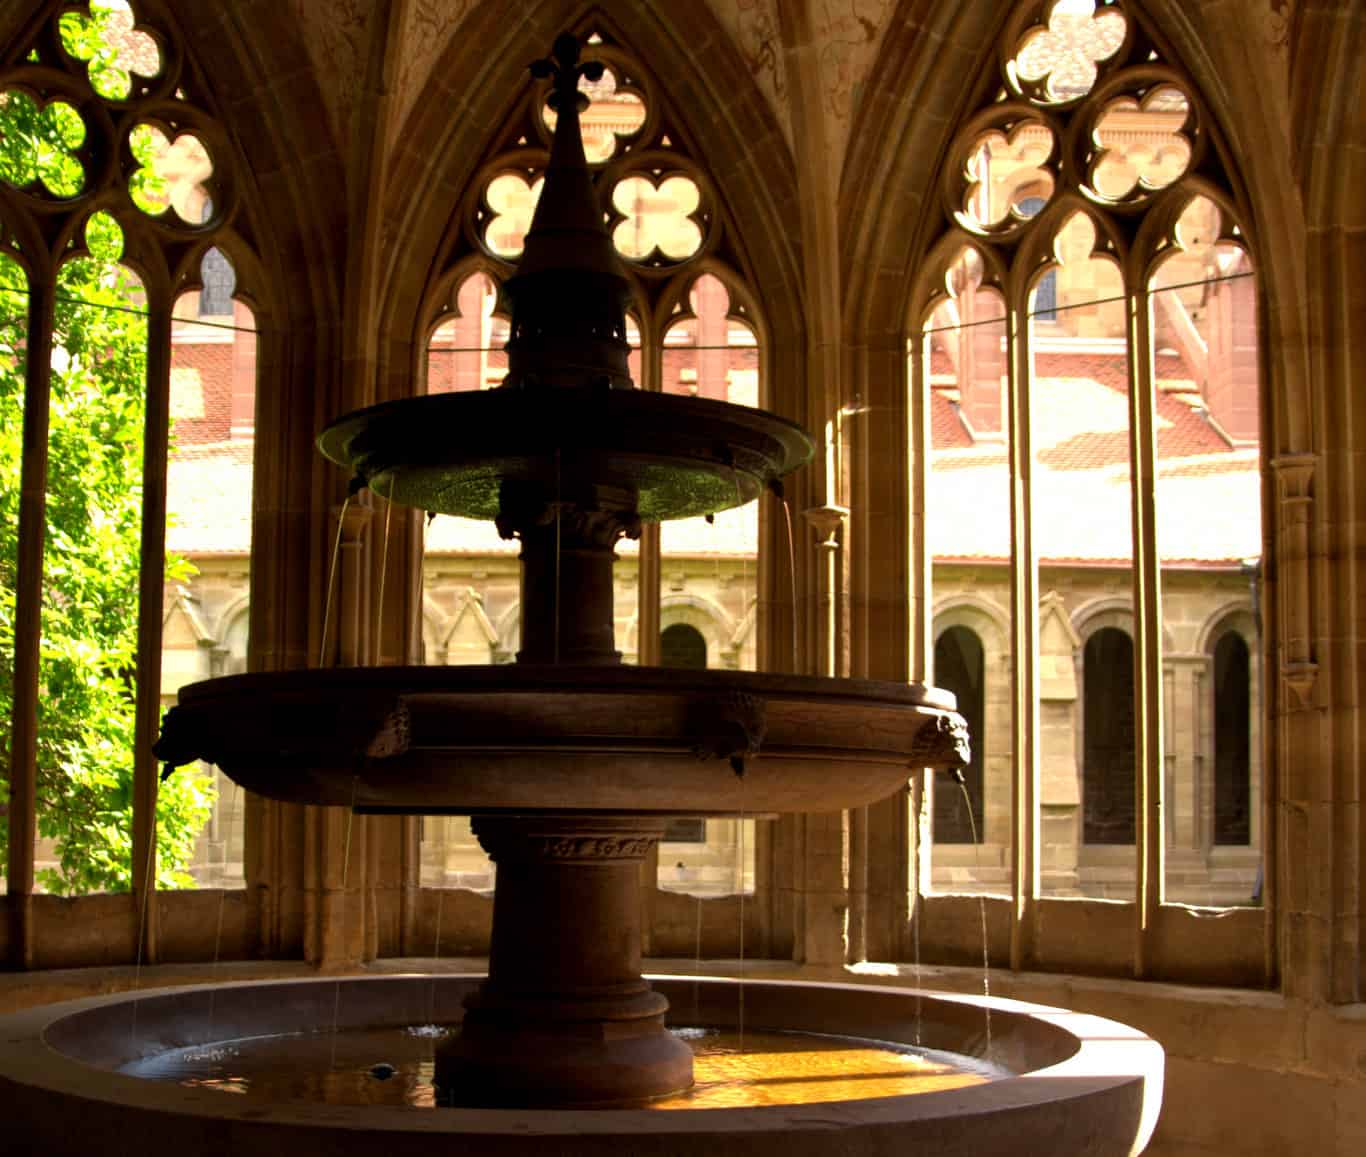 The fountain in the monastery of Maulbronn Amazing Temples 2015/10/22